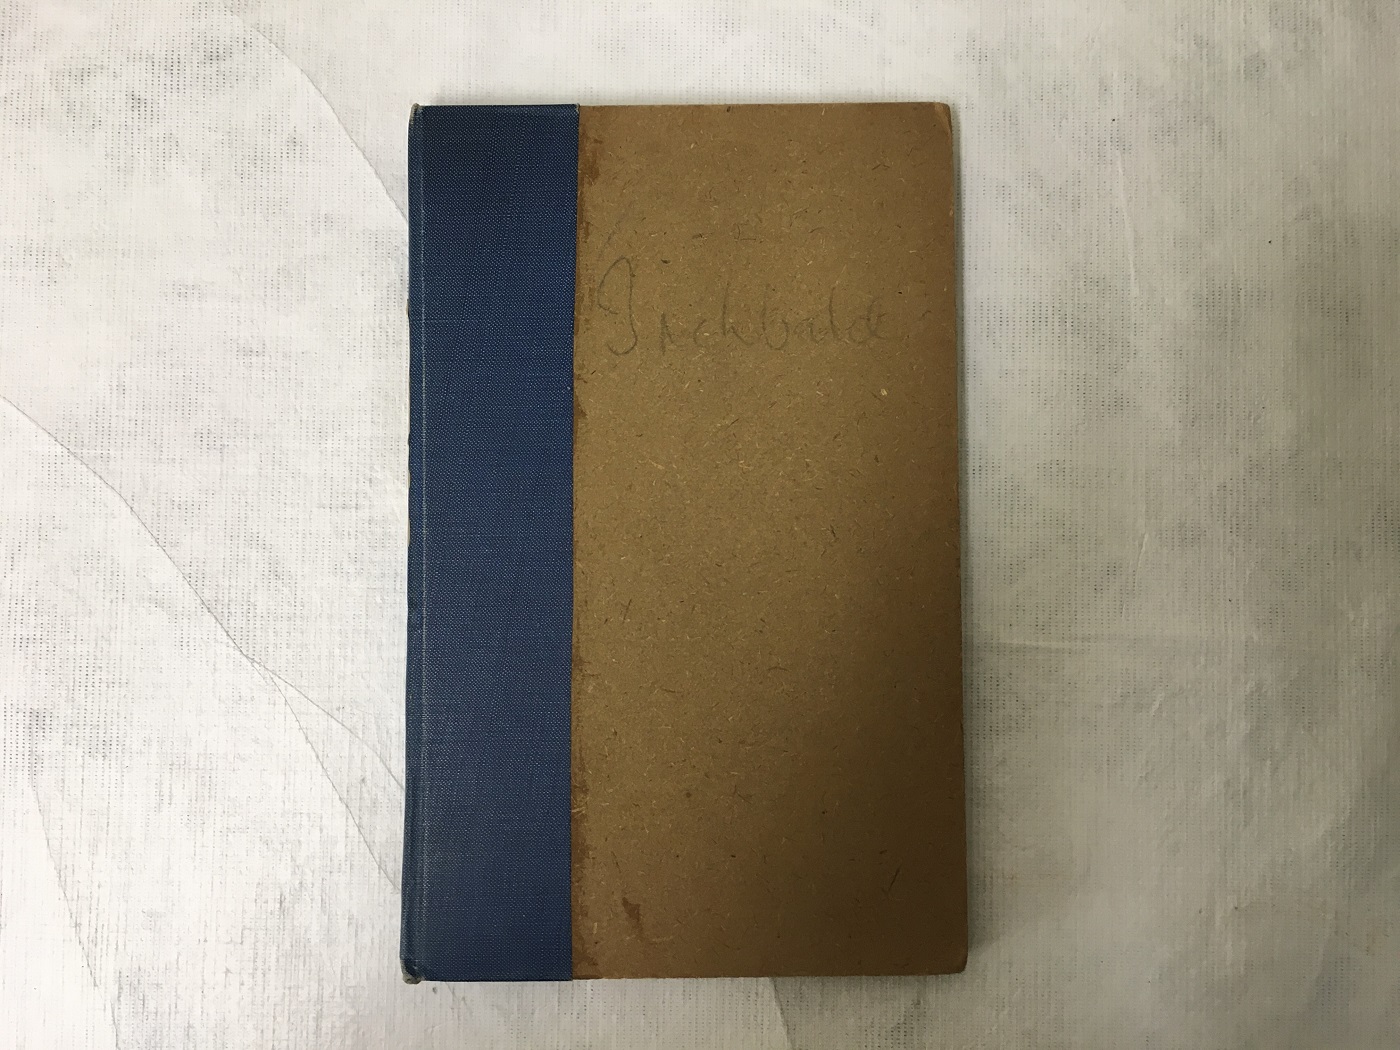 Lovers Vows, first edition. Front cover: brown board with blue tape binding.